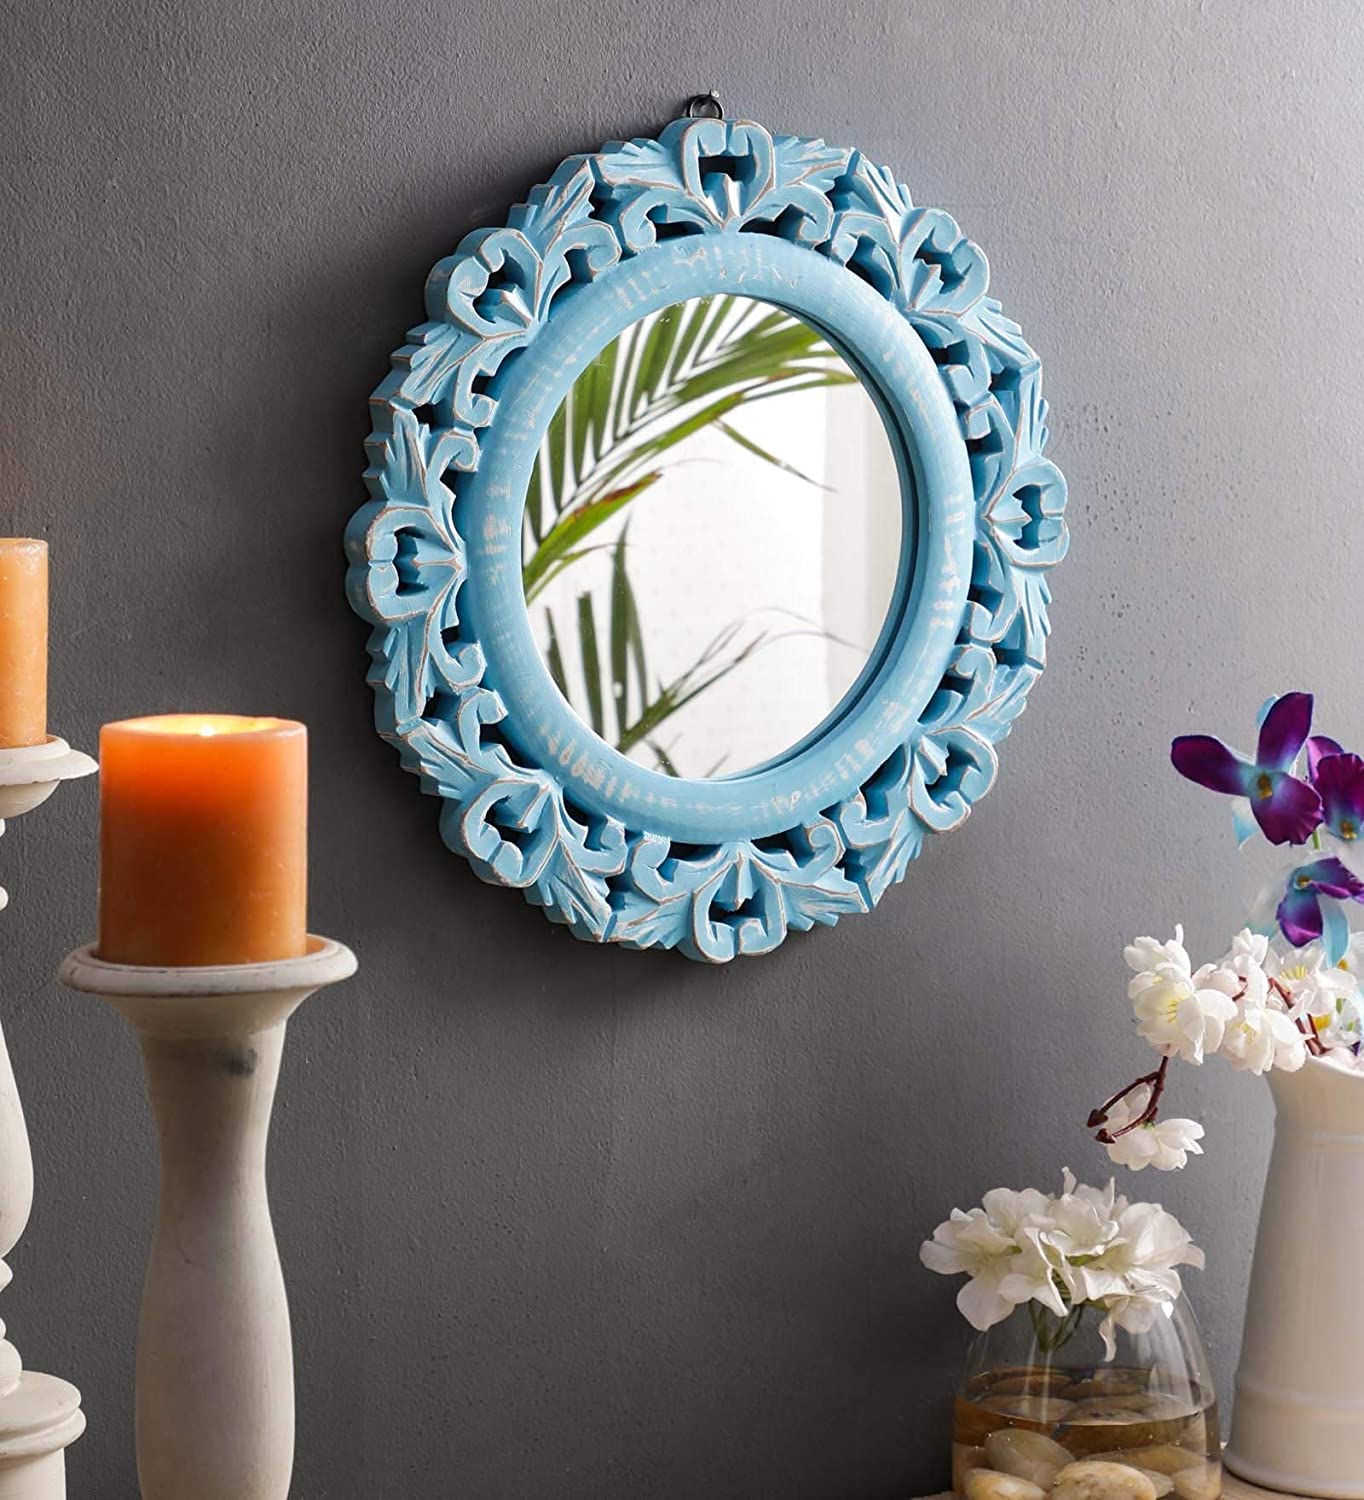 Wood Hand Crafted Round Shape Vanity Wall Mount Mirror Glass-Blue, 35X 35 X 1.5 cm, Framed